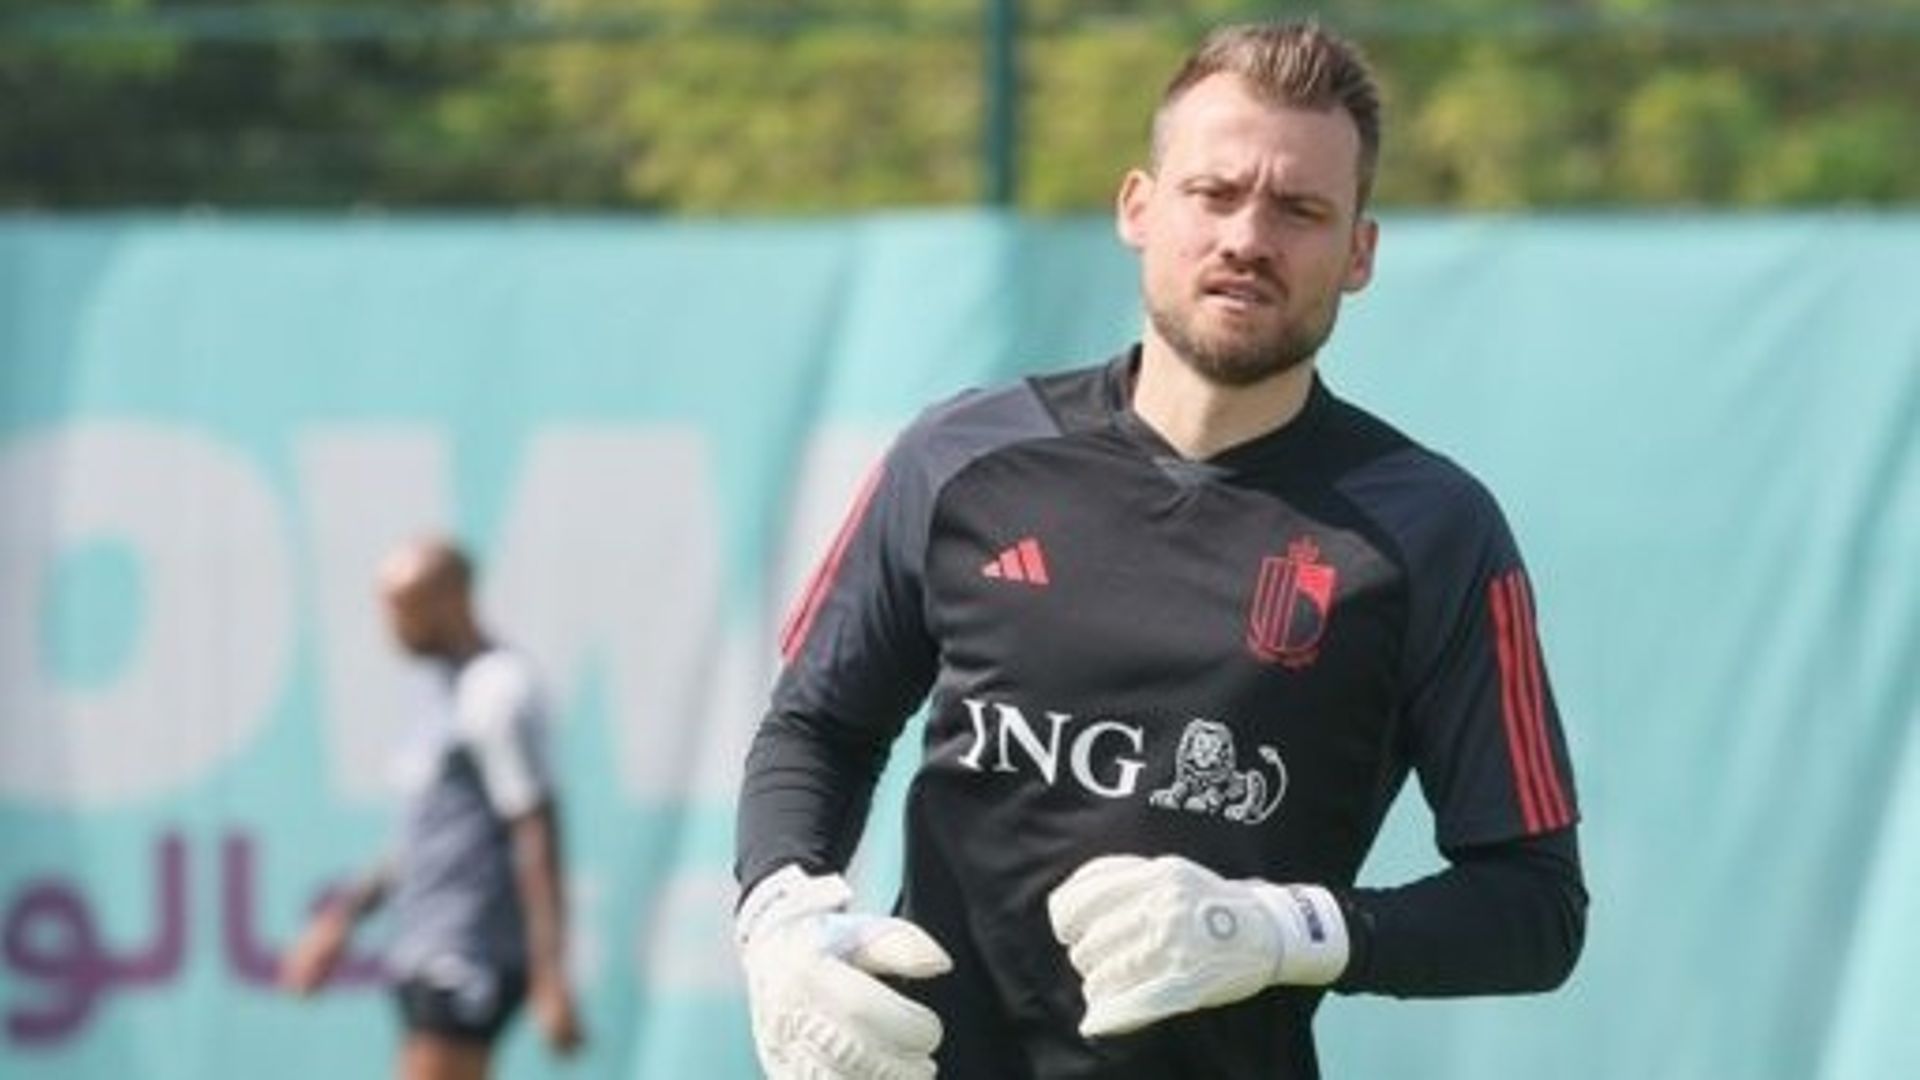 Belgium's goalkeeper Simon Mignolet pictured during a training session of the Belgian national soccer team the Red Devils, at the Hilton Salwa Beach Resort in Abu Samra, State of Qatar, Sunday 20 November 2022. The Red Devils are preparing for the upcomin